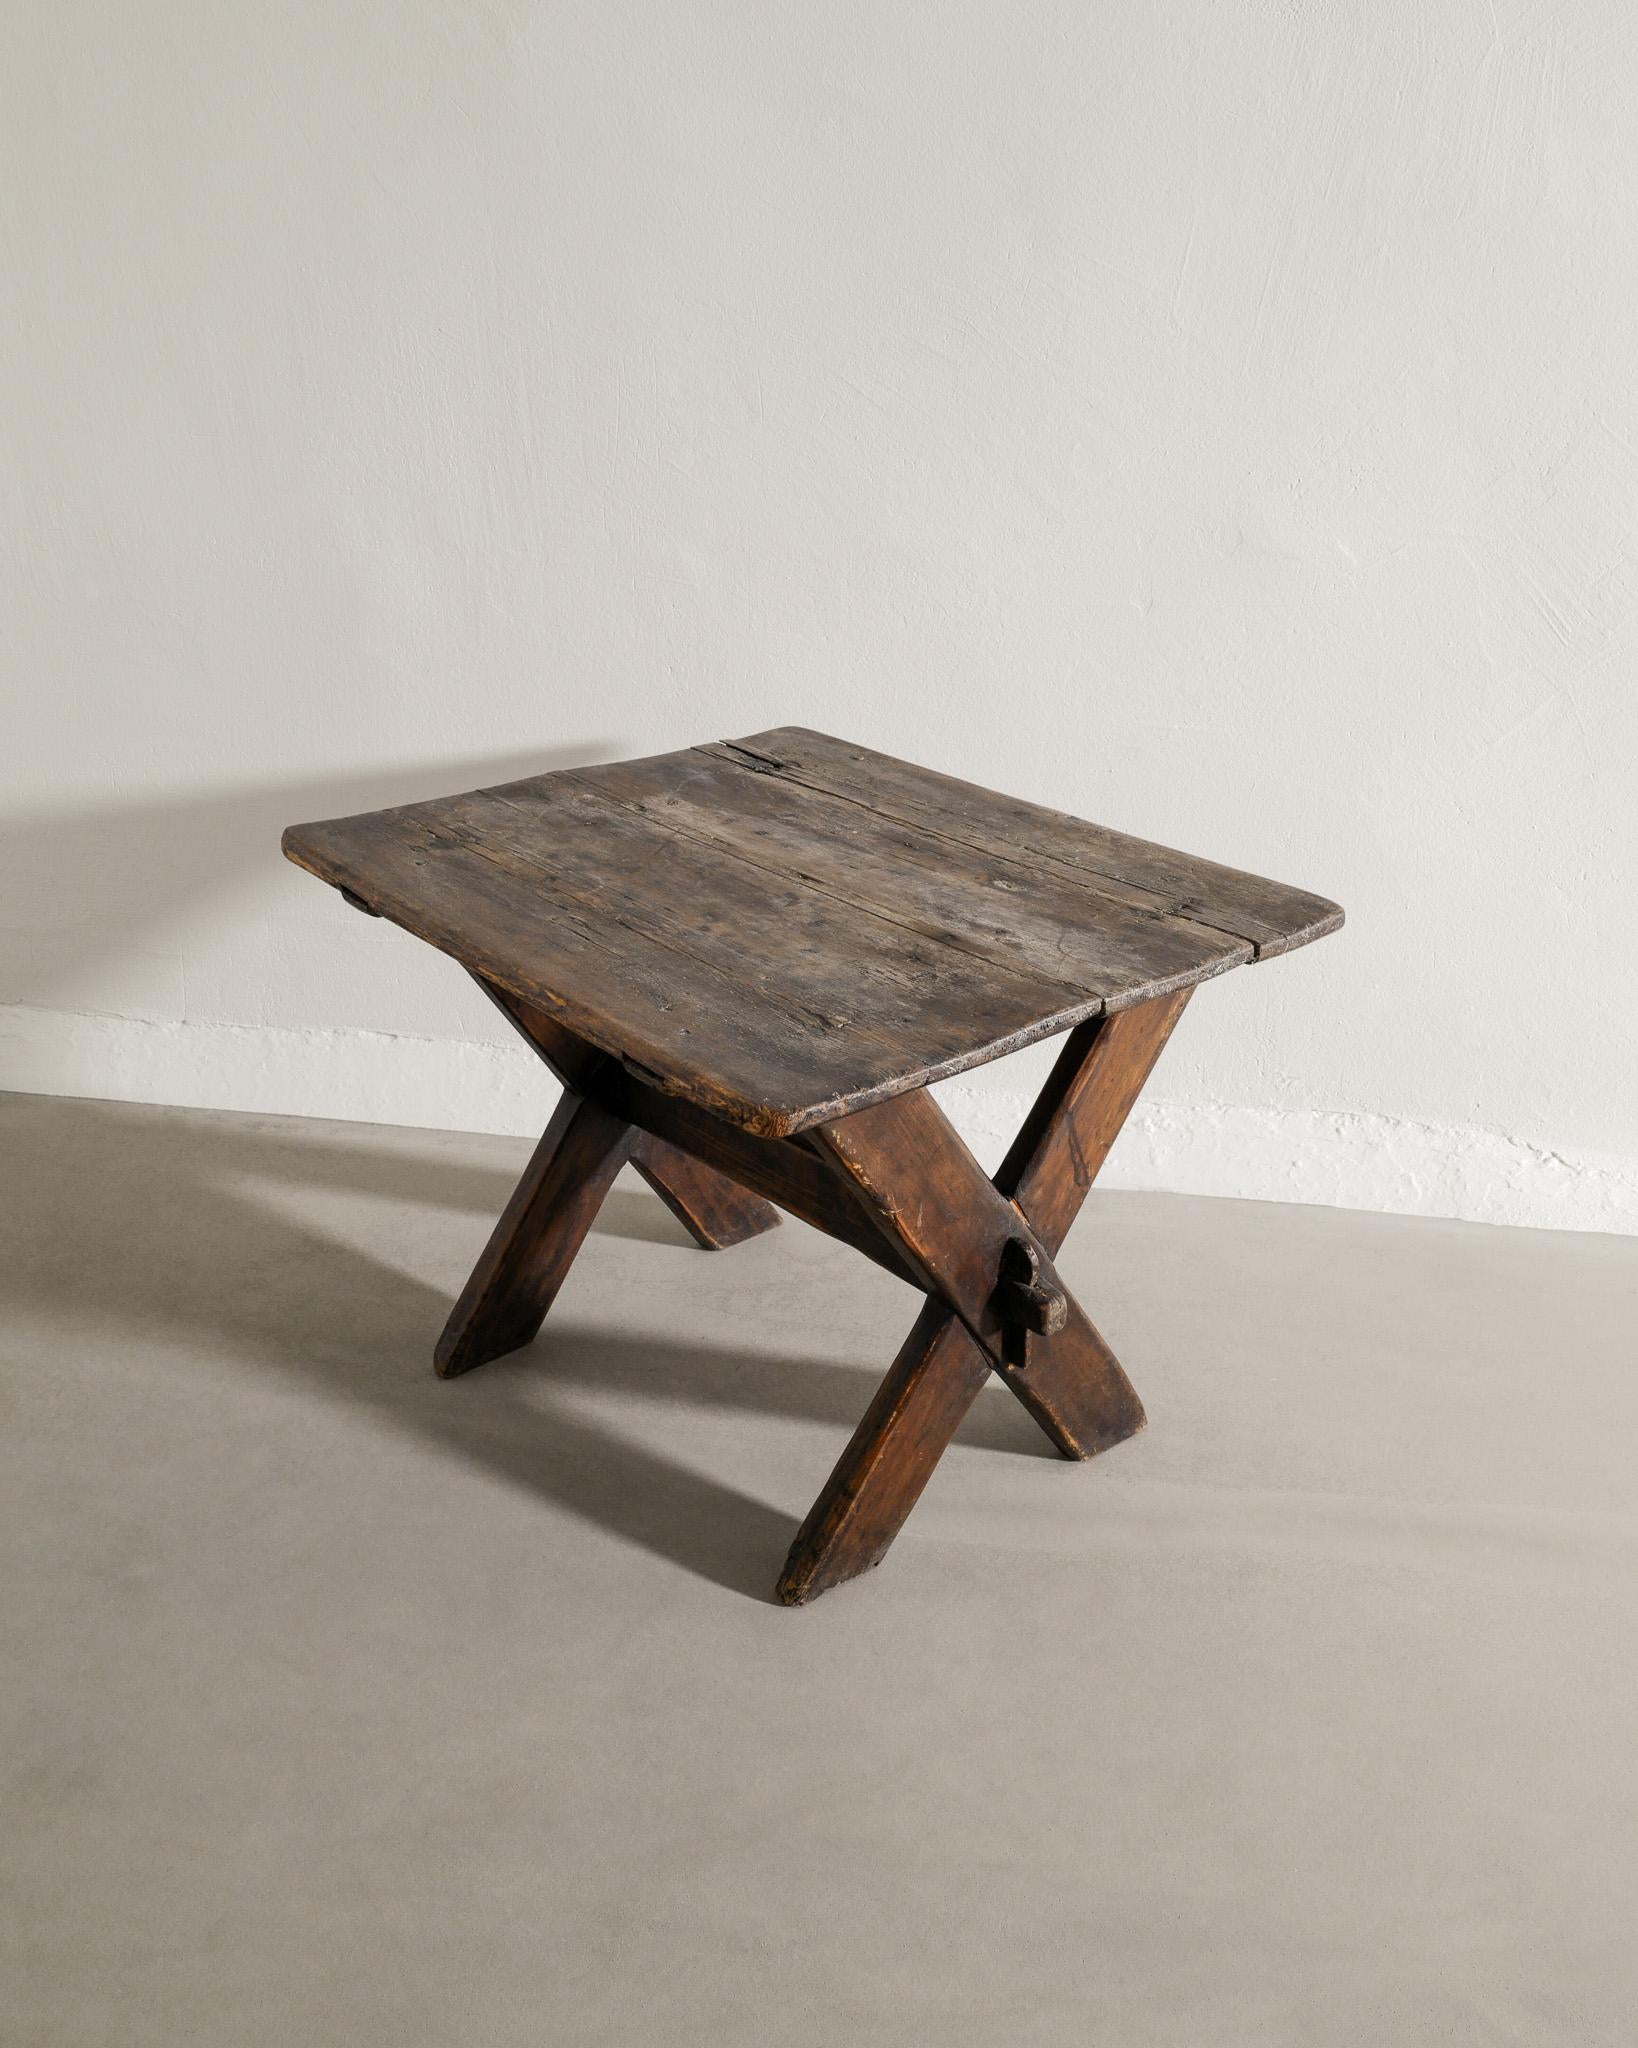 Scandinavian Modern Swedish Antique Dark Wooden Pine Table with Crossed Legs Produced Late, 1800s 